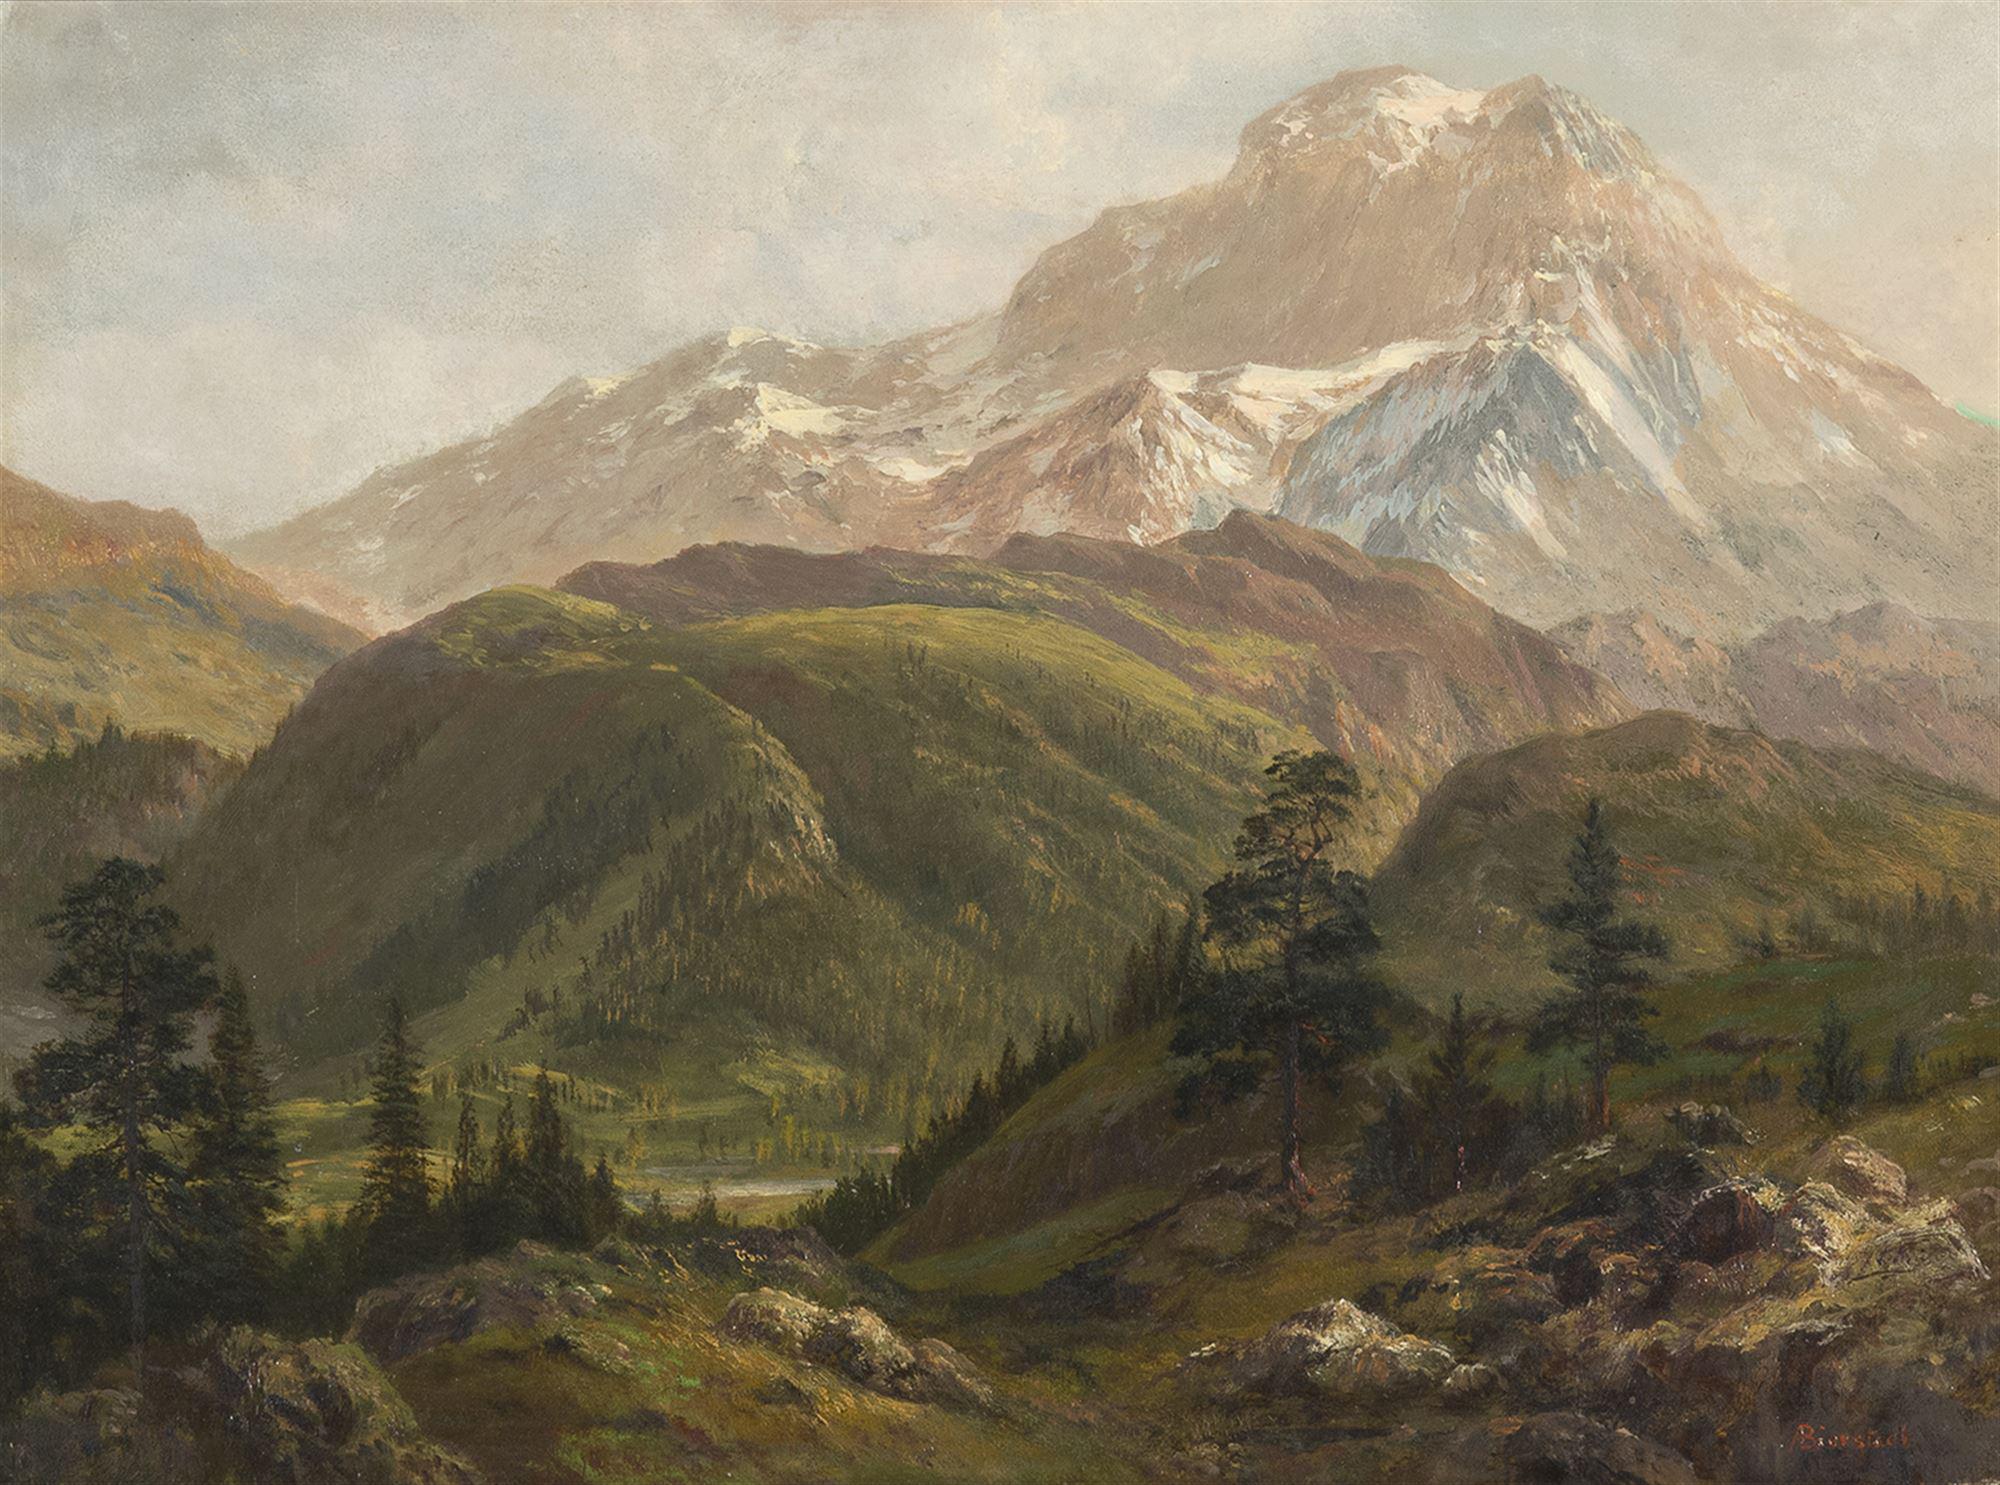 

											</b>

											<em>
												Lure of the West: Celebrating 50 Years of Gerald Peters Gallery  </em> 

											<h4>
												New York: April 29 - May 27, 2022      Santa Fe: June 24 - July 23, 2022											</h4>

		                																																													<i>Albert Bierstadt, Source of the Snake River,</i>  
																																								1881, 
																																								oil on paper mounted on canvas, 
																																								14 x 19 inches 
																								
		                				